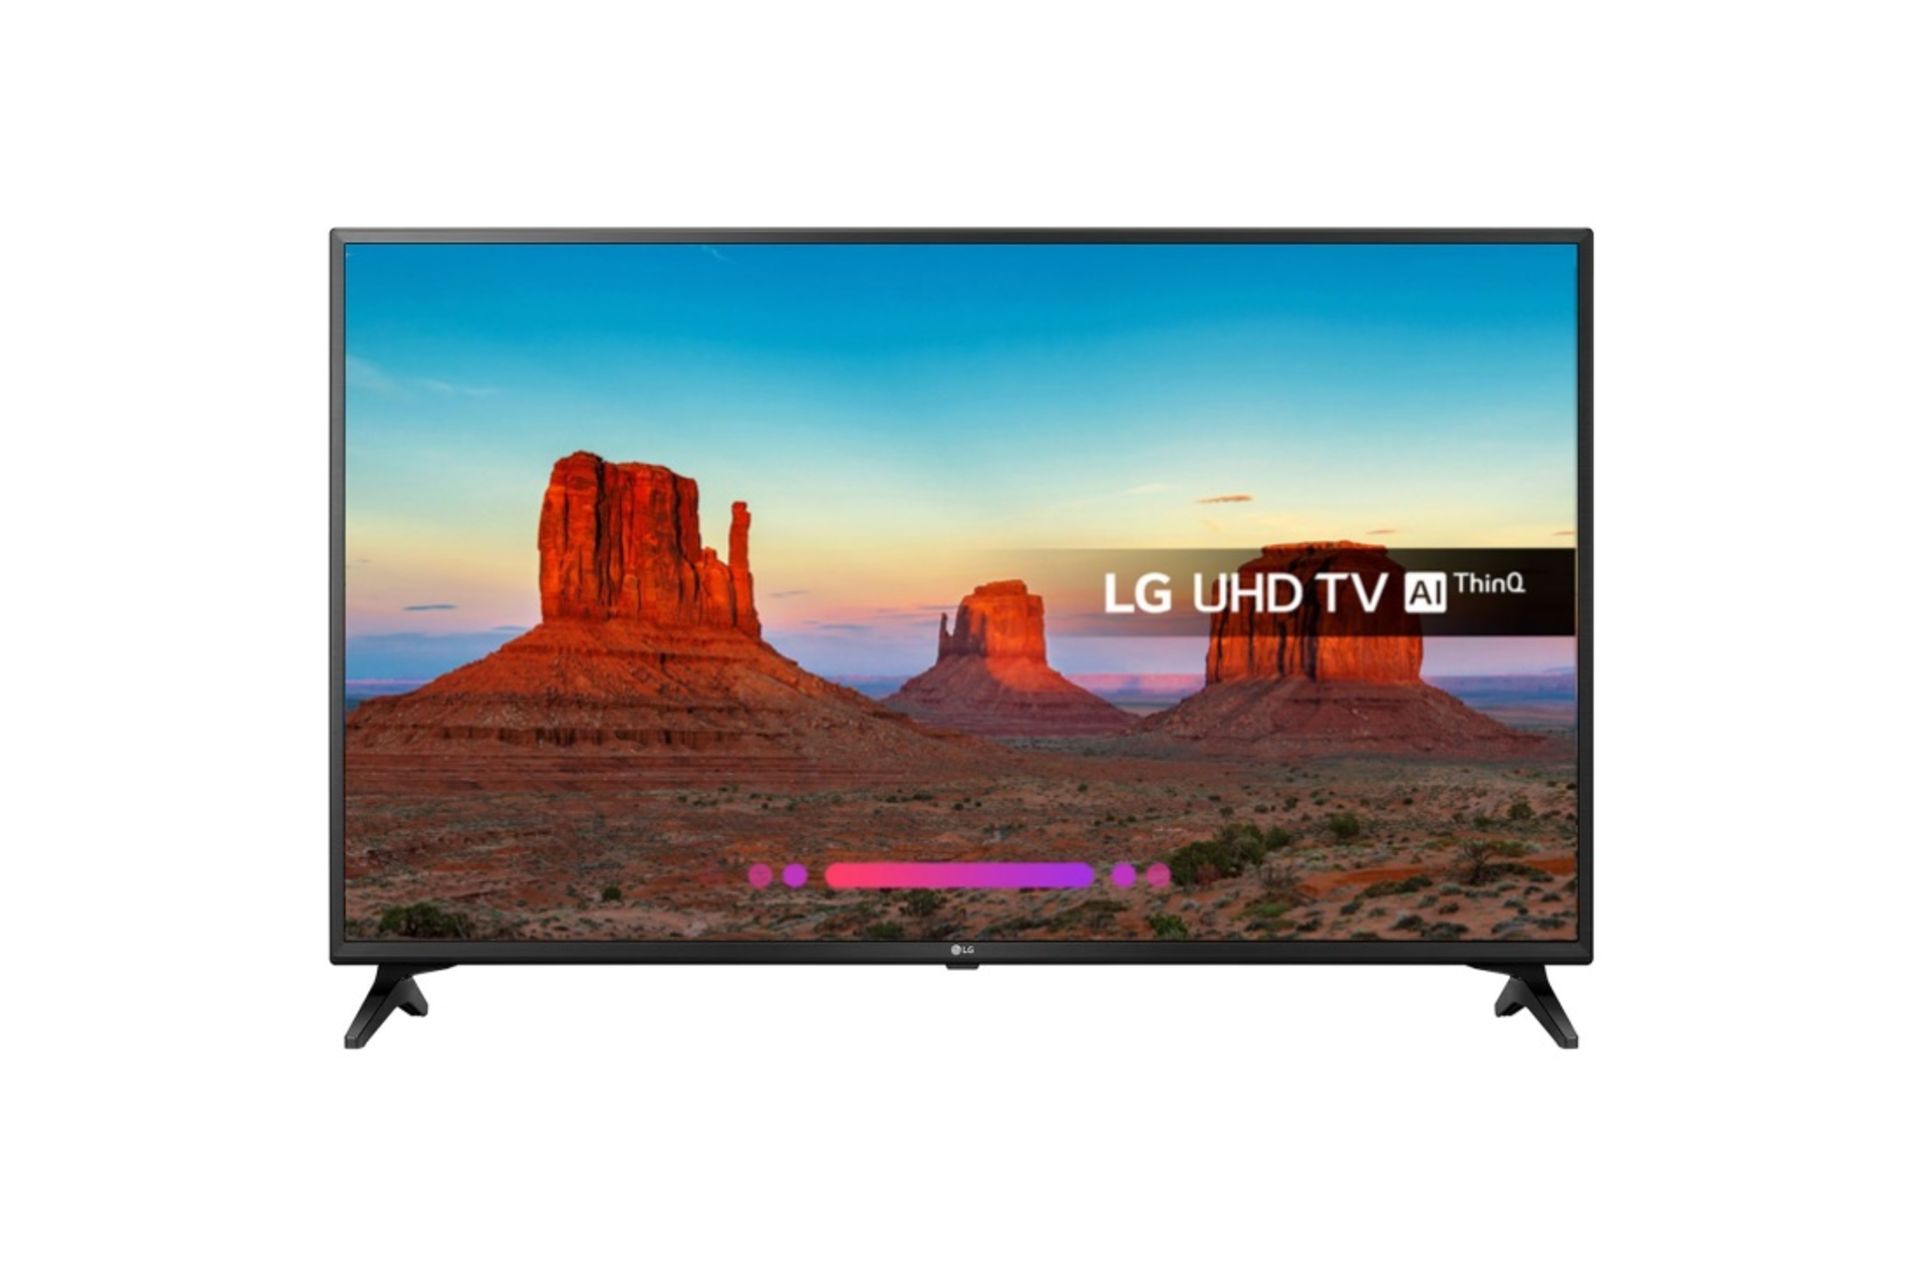 V Grade A LG 43 Inch ACTIVE HDR 4K ULTRA HD LED SMART TV WITH FREEVIEW HD & WEBOS & WIFI - AI TV